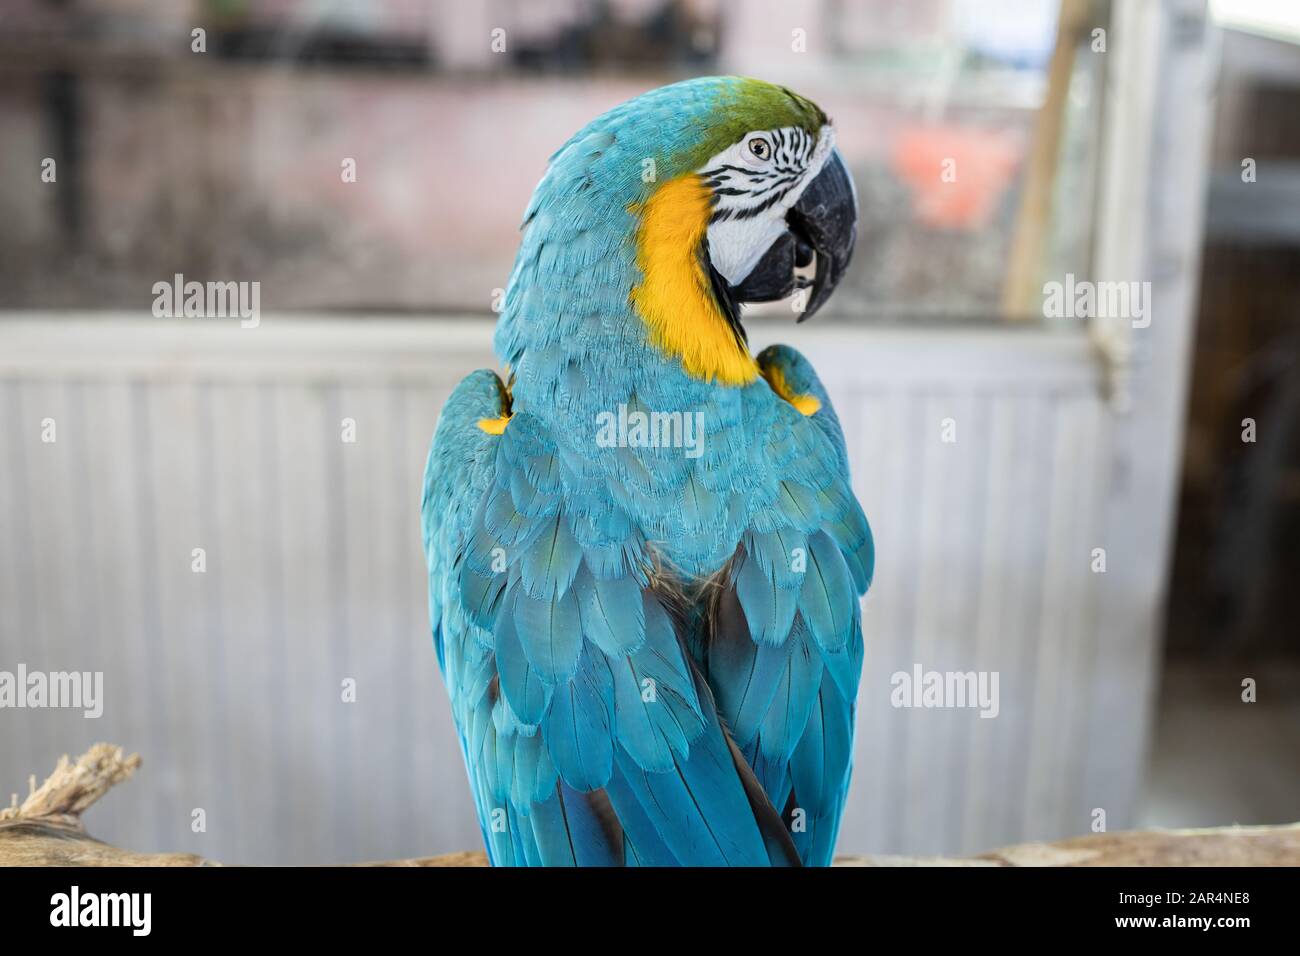 Beautiful macaw parrots that are staring. Colorful macaw parrots of nature. Stock Photo